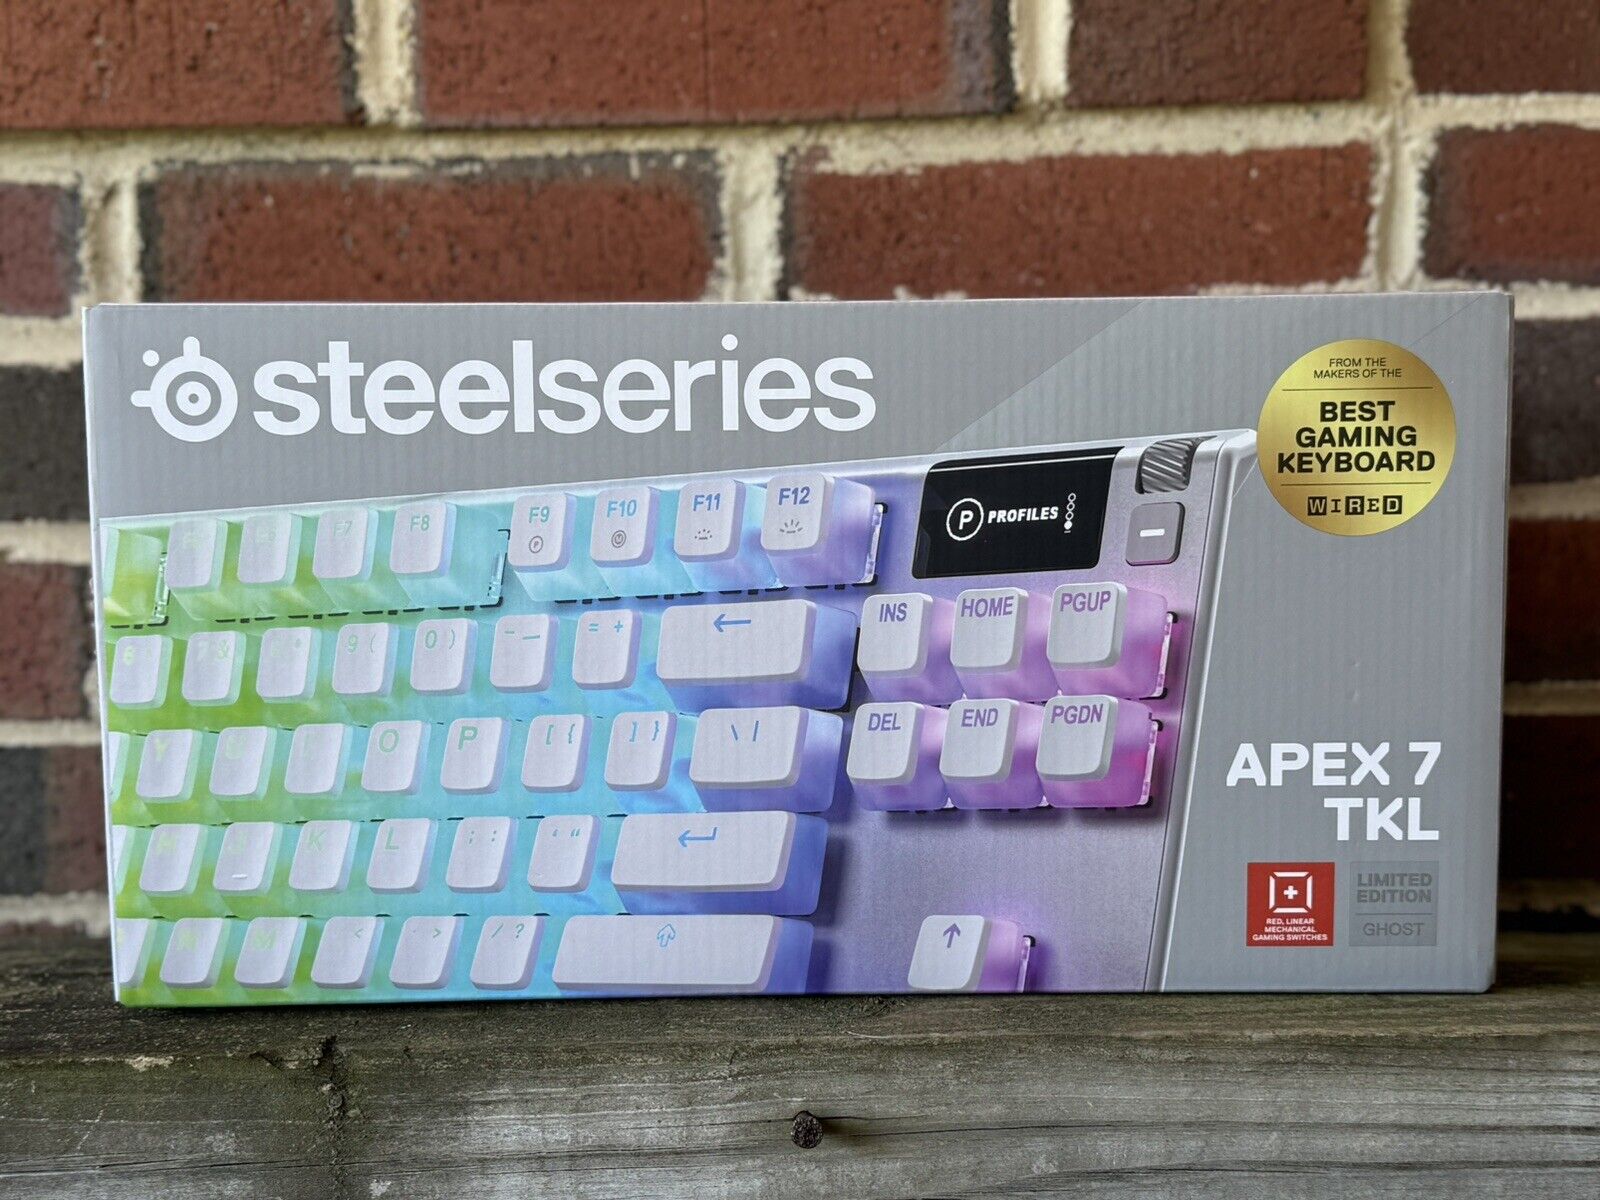 🌀 SteelSeries - Apex 7 TKL Gaming WIred Mechanical Keyboard - Ghost Edition 🌀